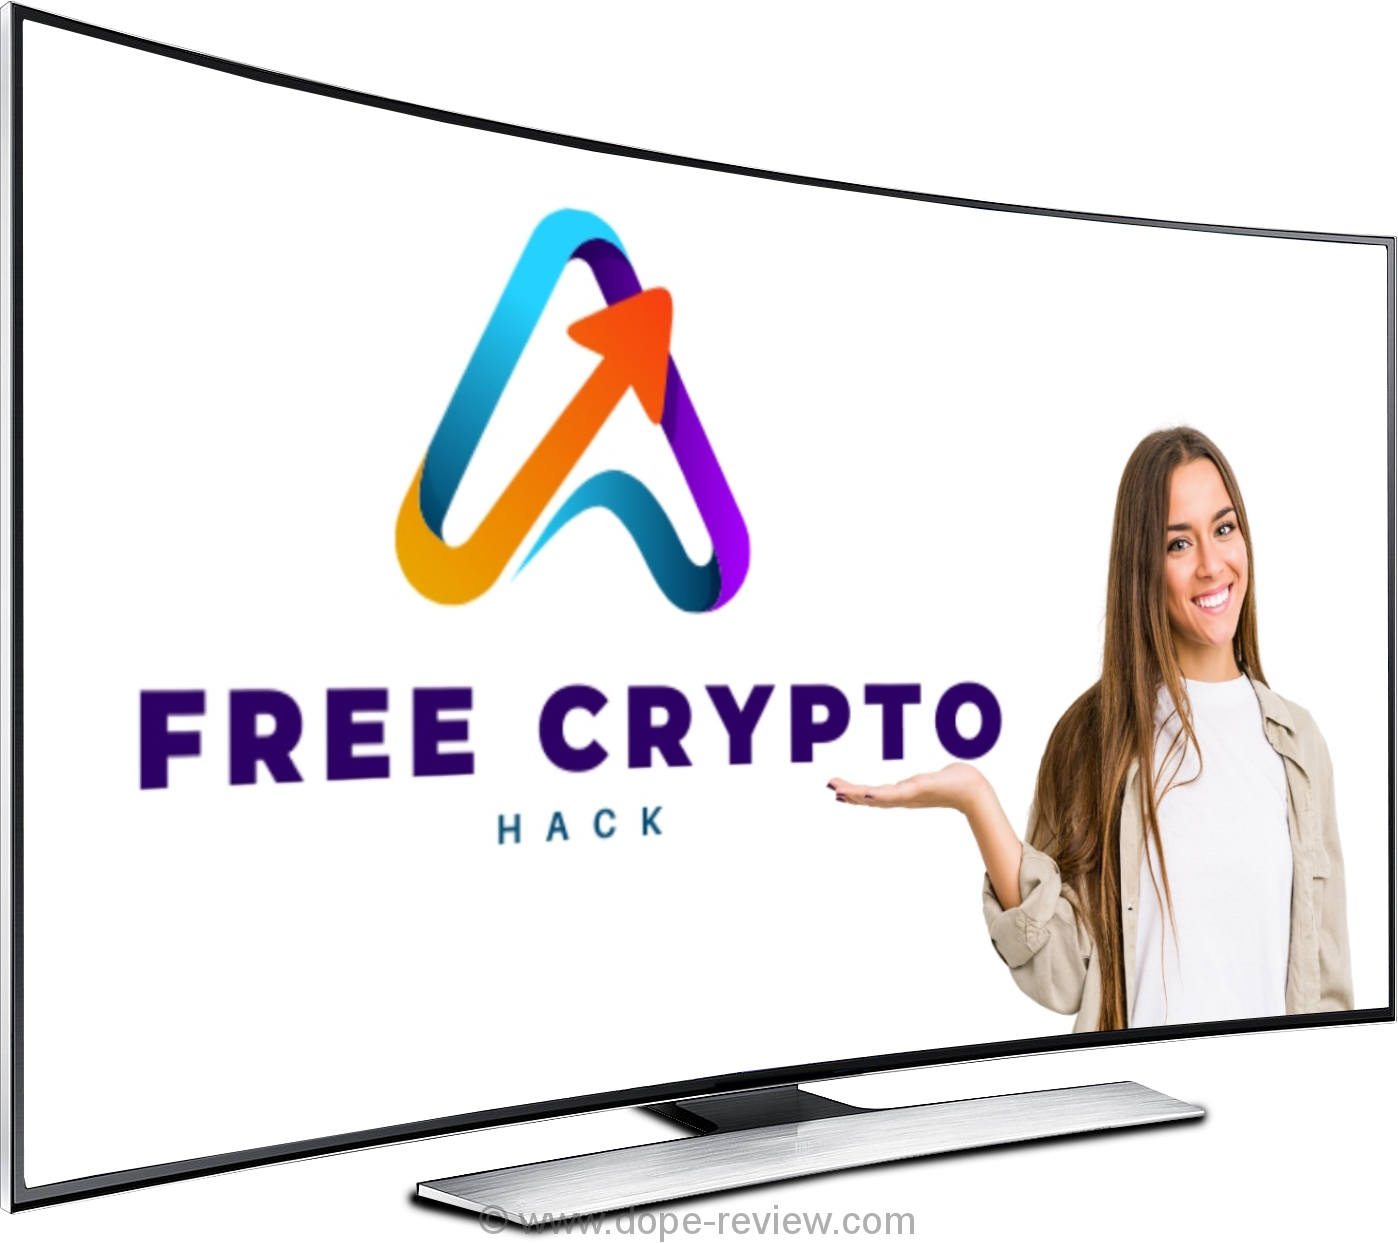 Free Crypto Hack Review